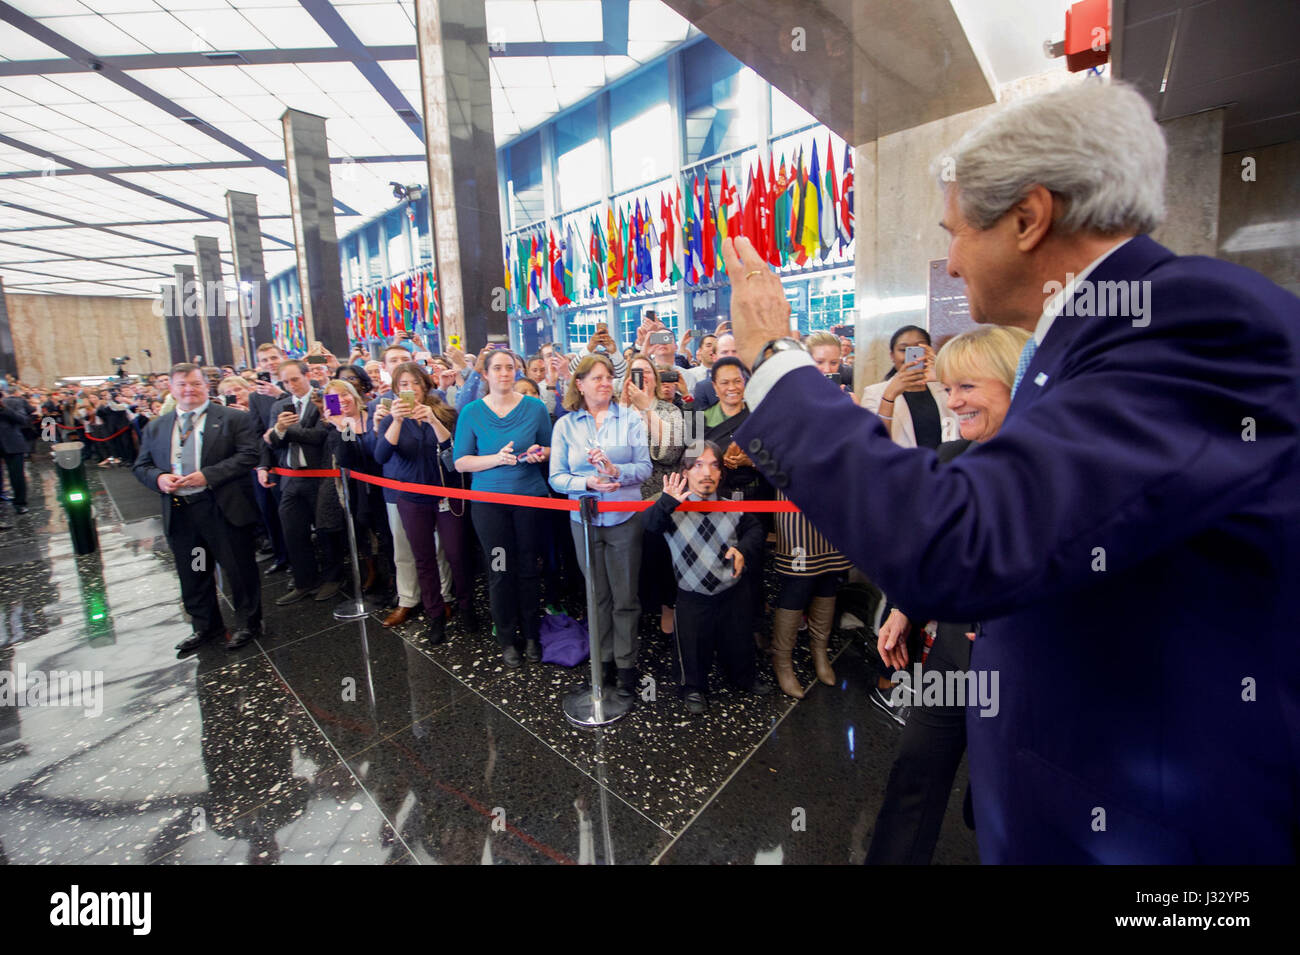 U.S. Secretary of State John Kerry waves to the crowd, as they gather in the main lobby of the Department's Harry S. Truman building, before delivering farewell remarks on January 19, 2017. Stock Photo